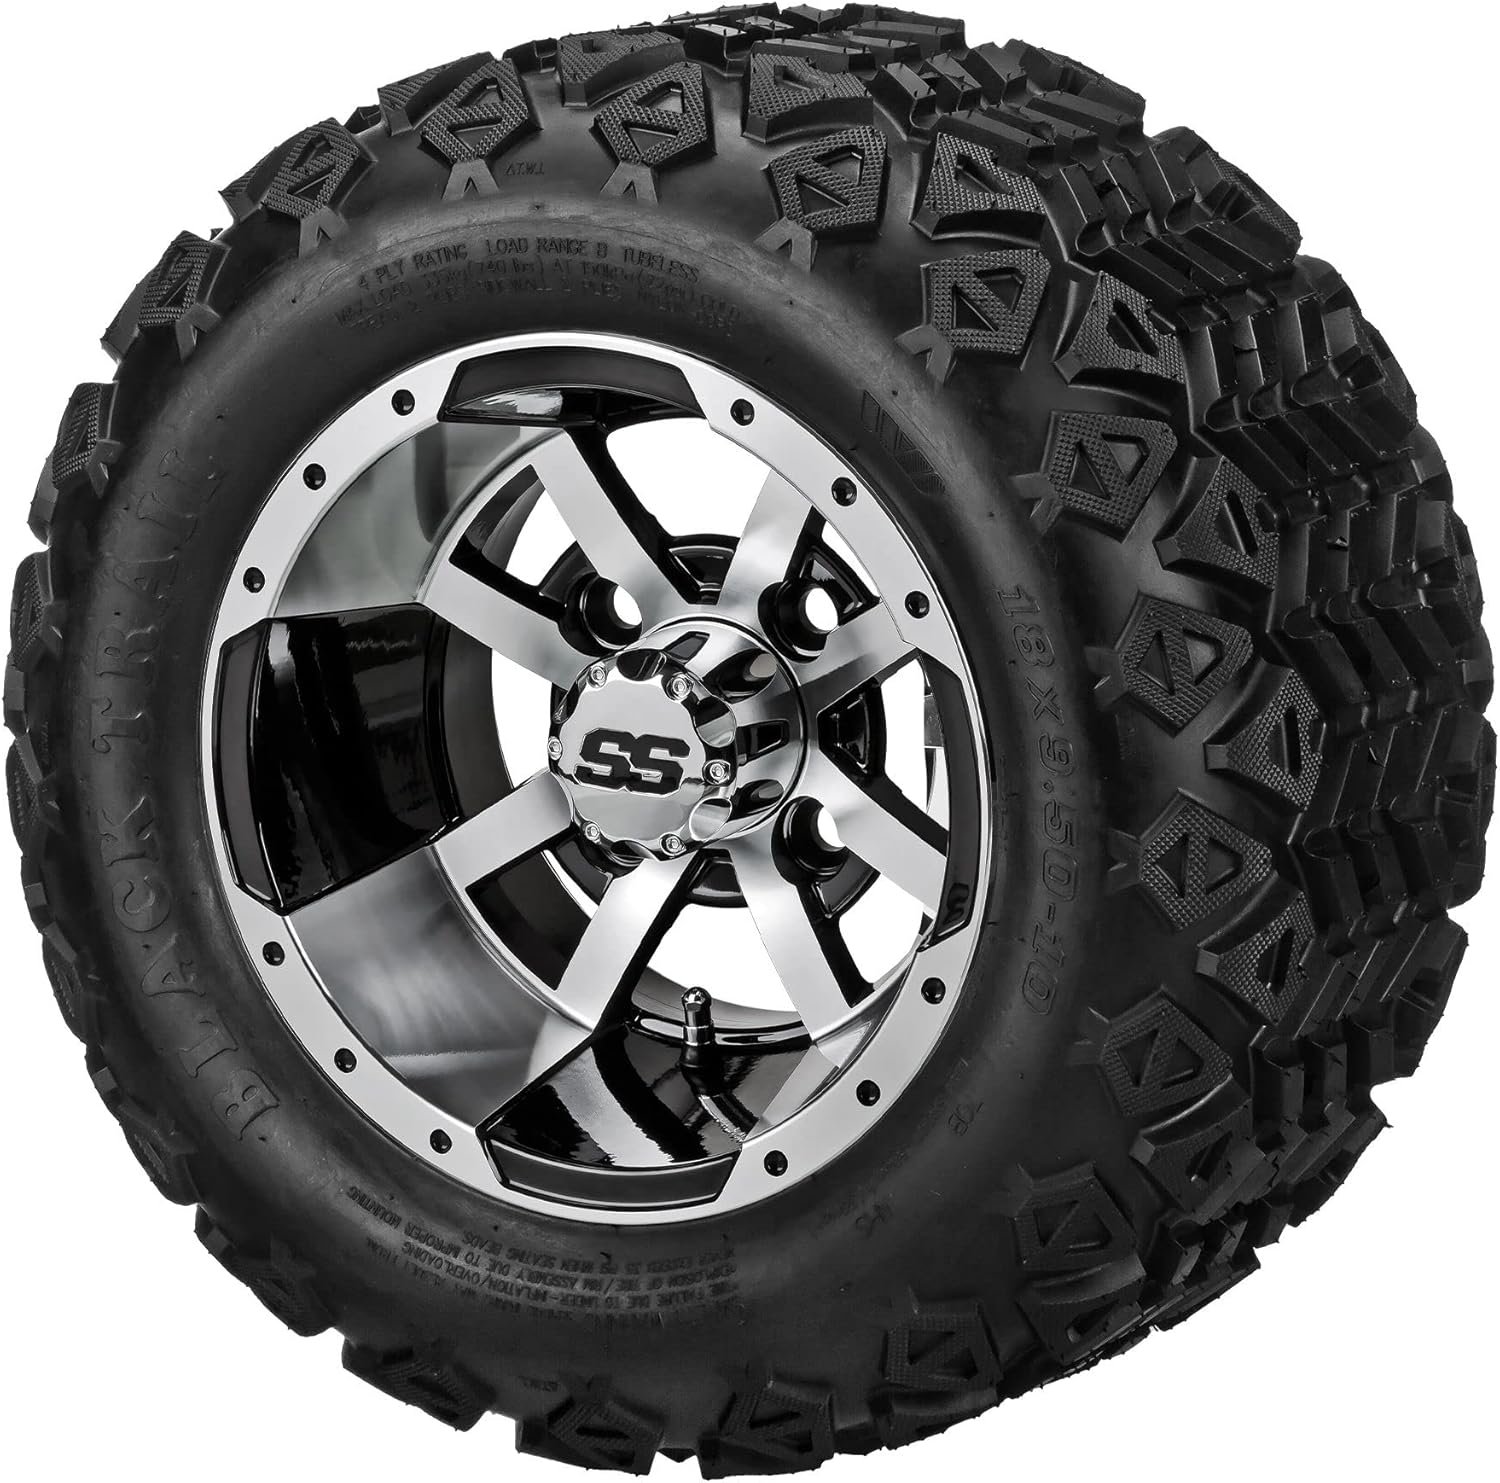 Golf Cart Tires and Wheels Combo Review